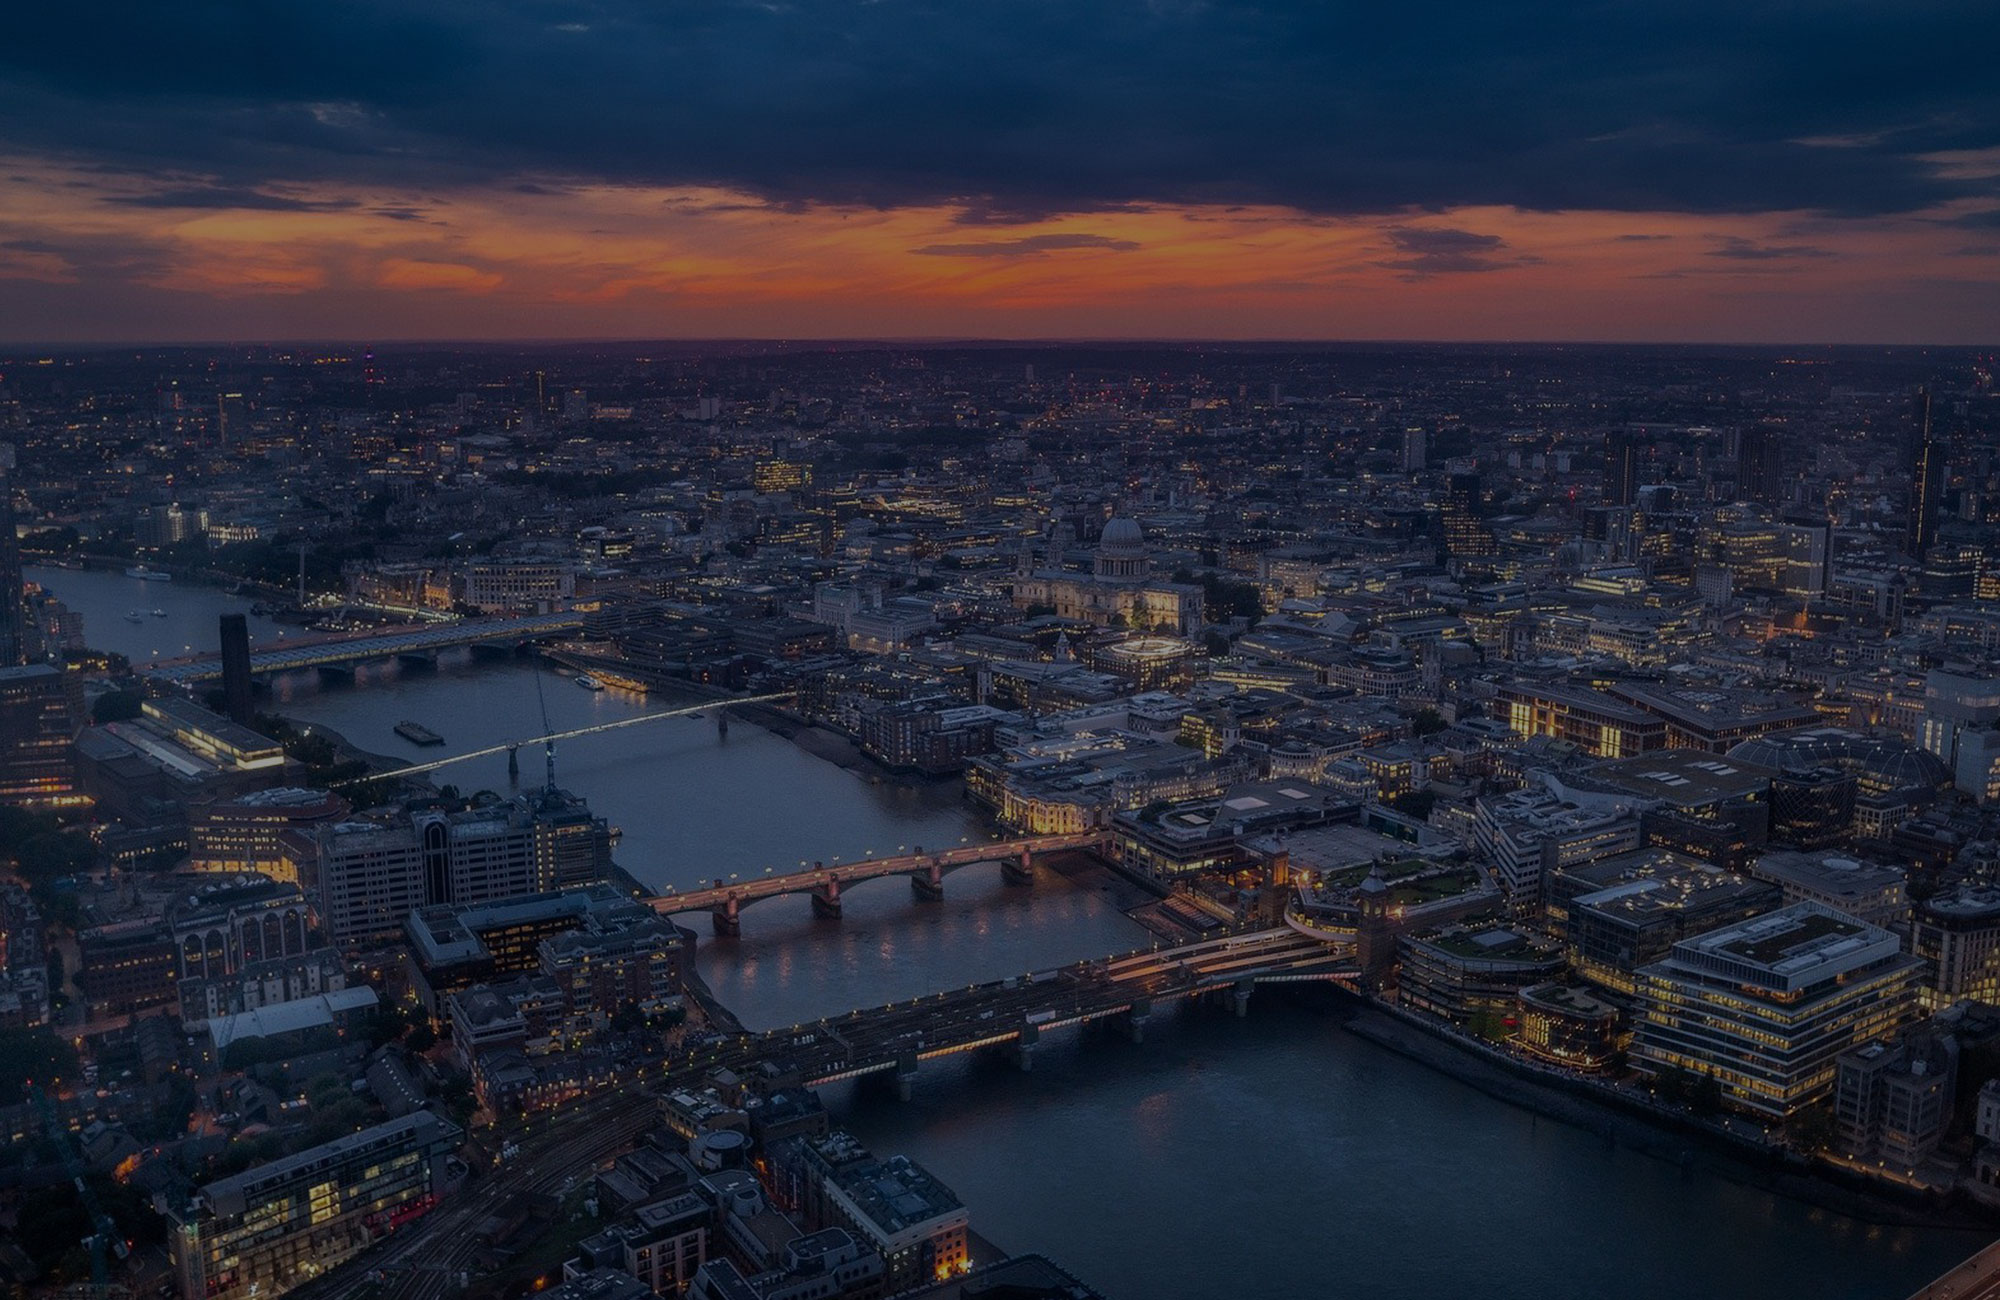 Sky View of Central London